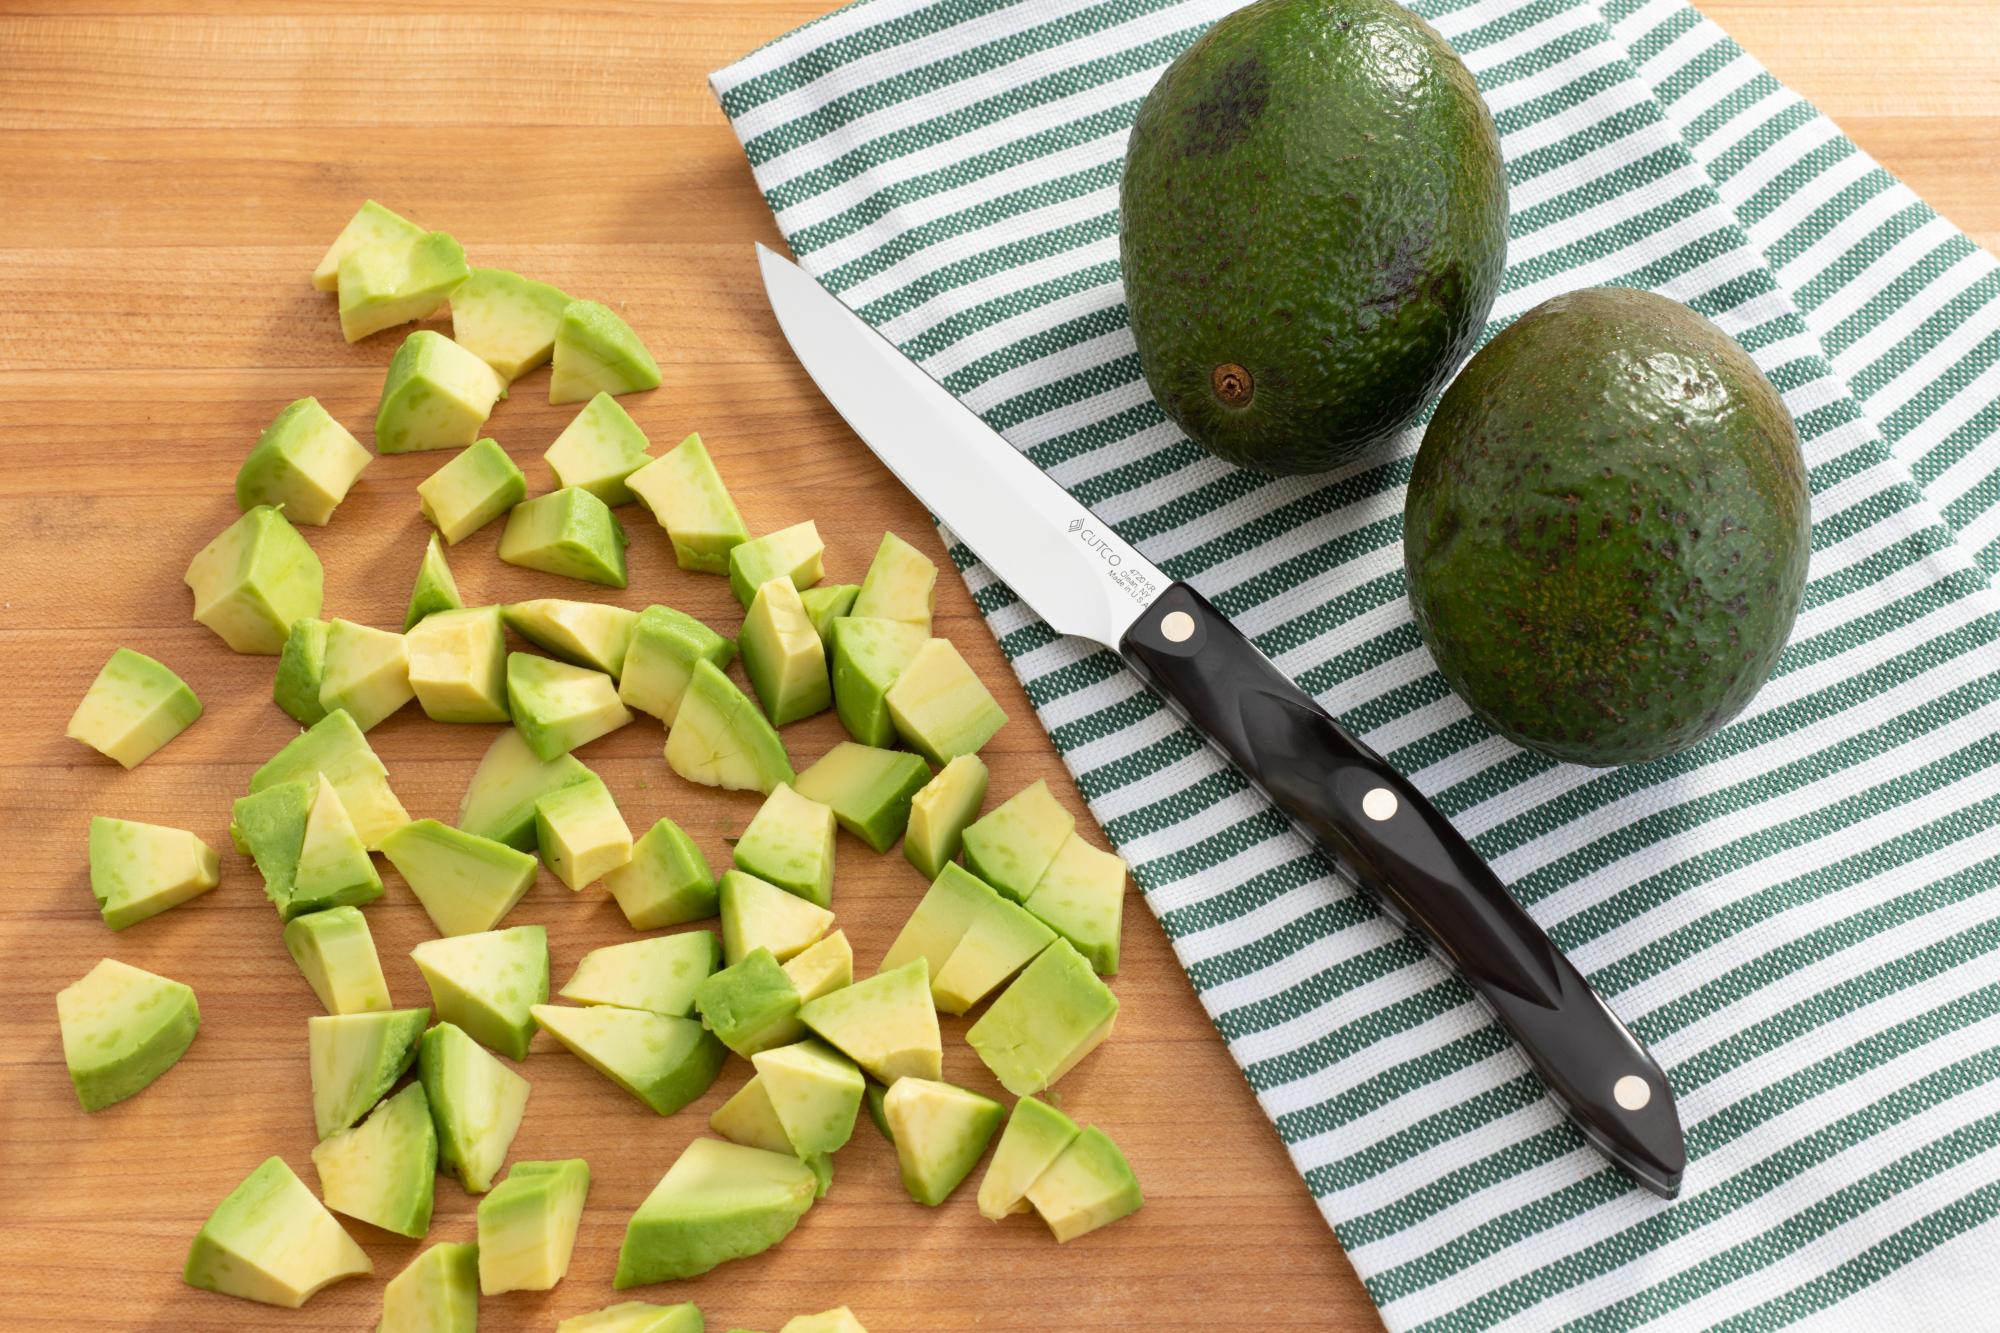 Diced avocado with the 4 Inch Gourmet Paring knife.